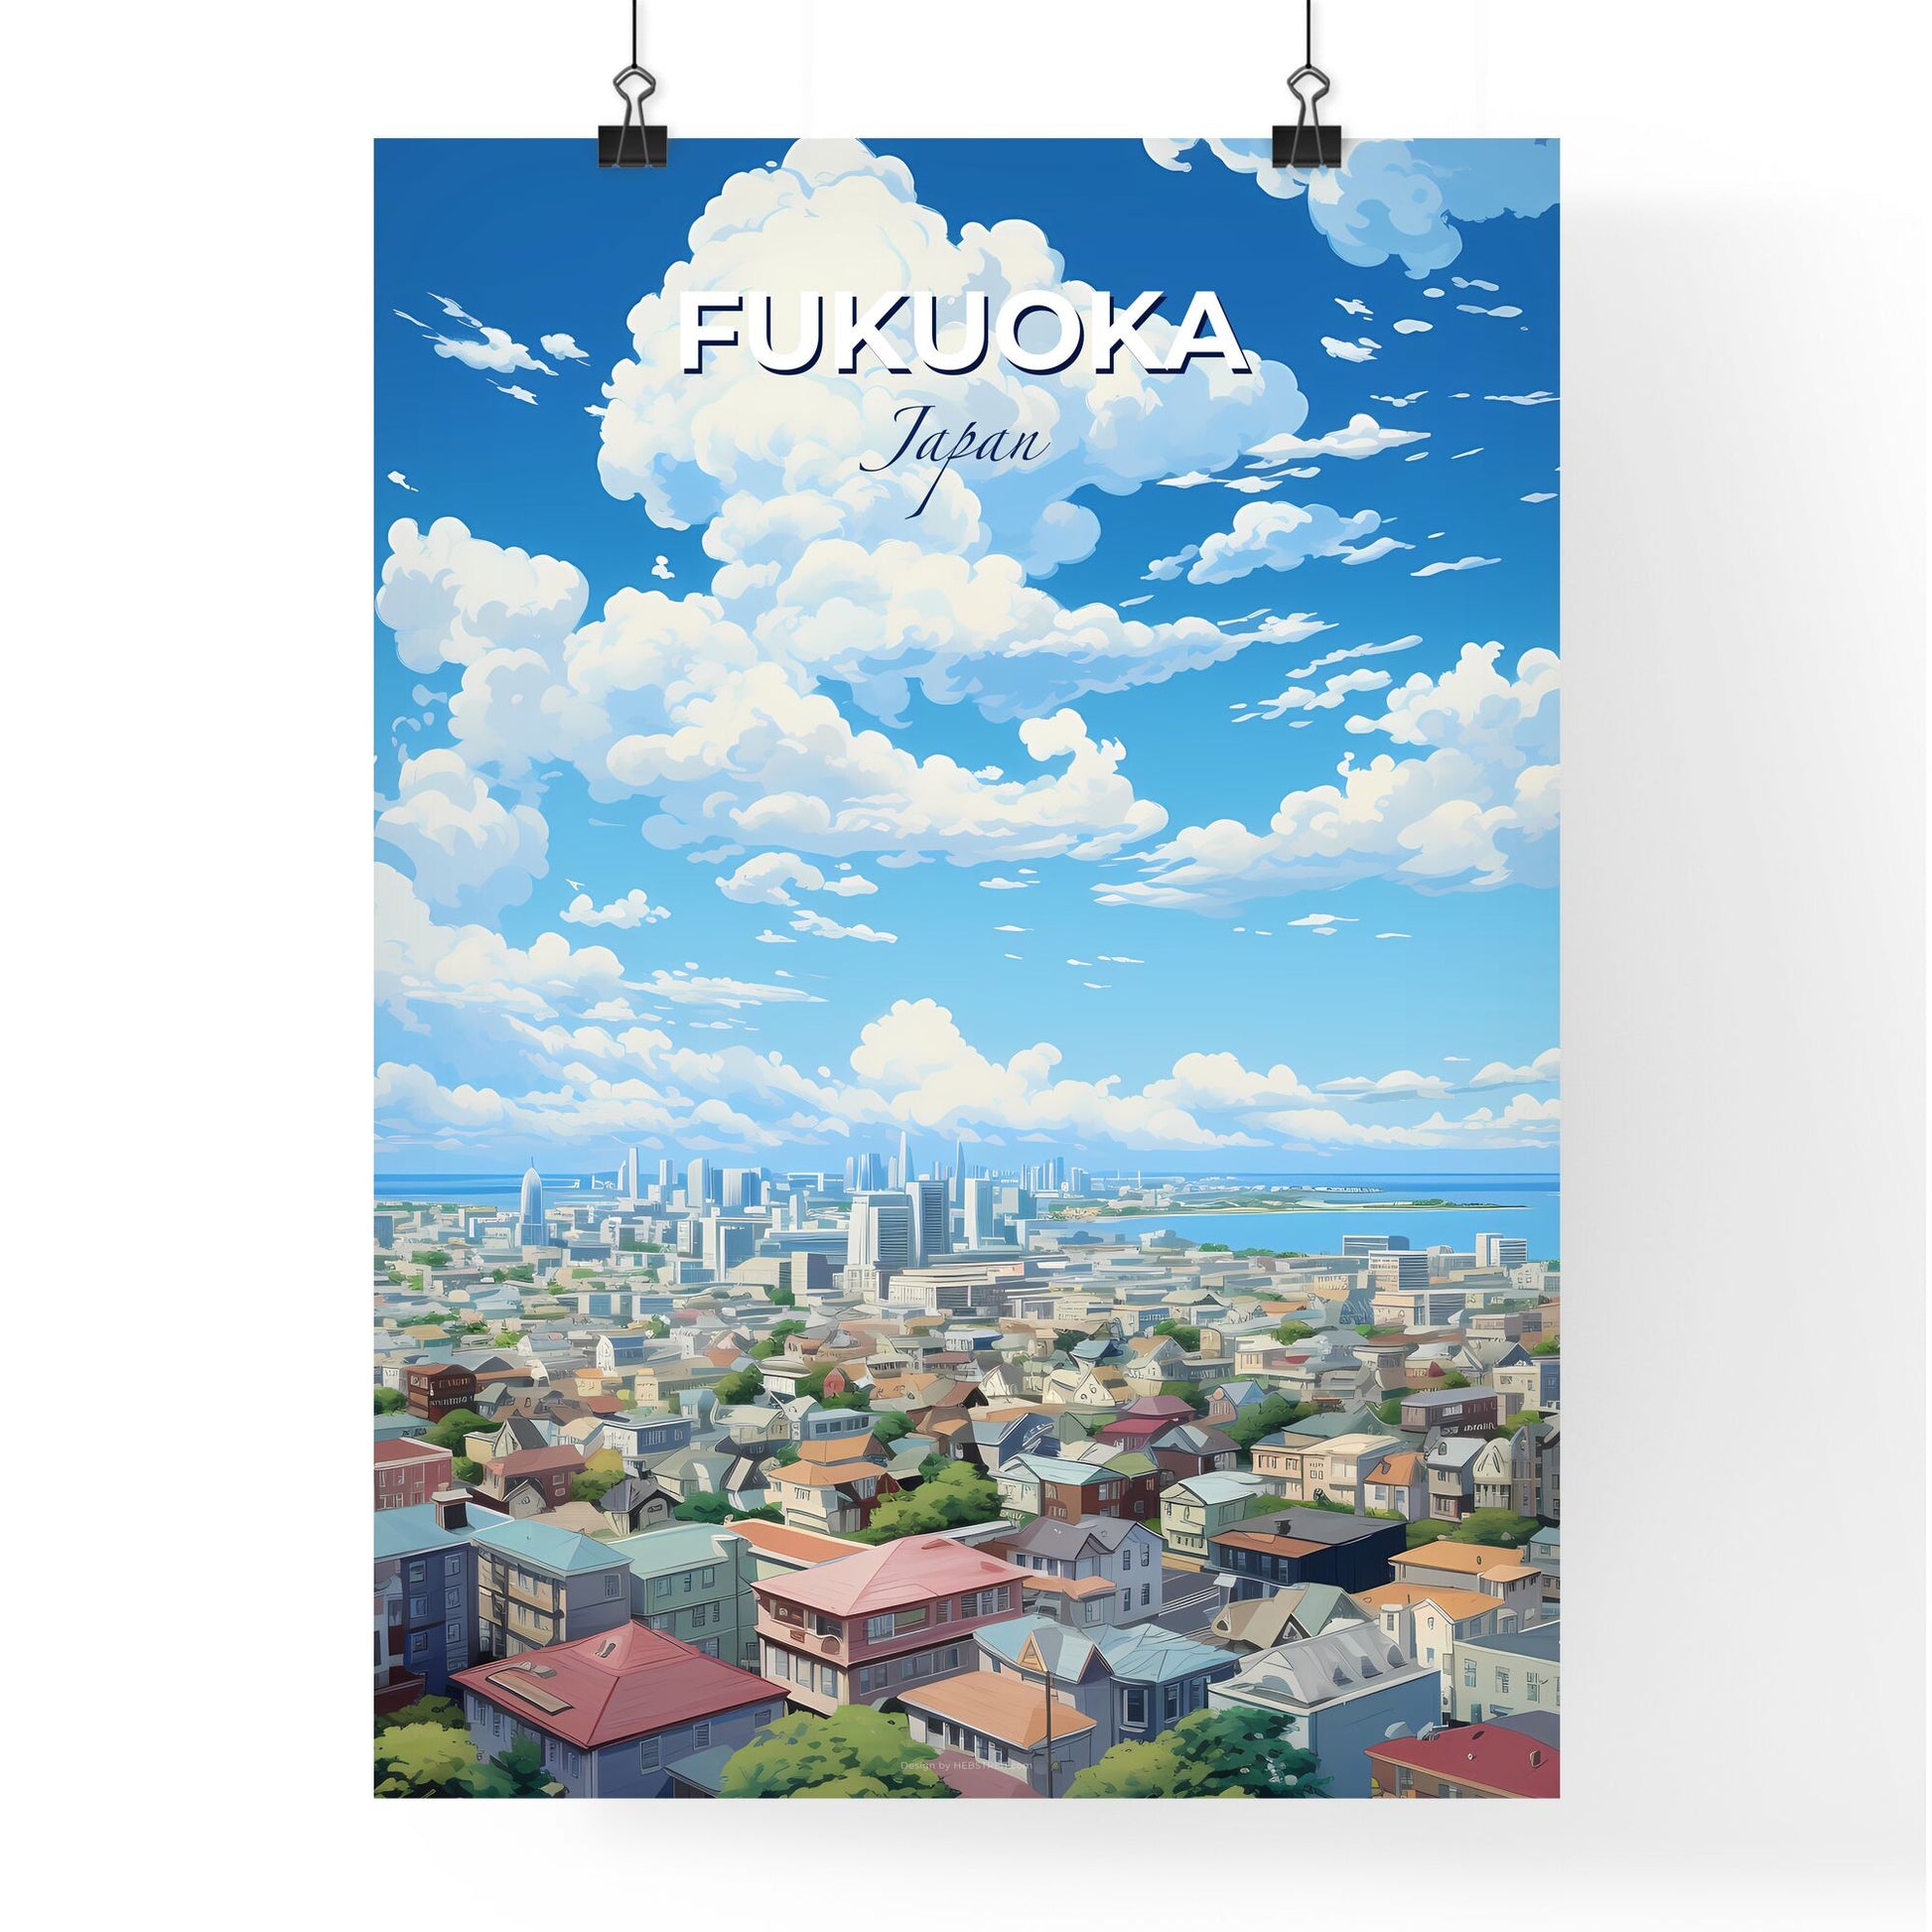 Fukuoka Japan Skyline - A City With Many Buildings And A Body Of Water - Customizable Travel Gift Default Title